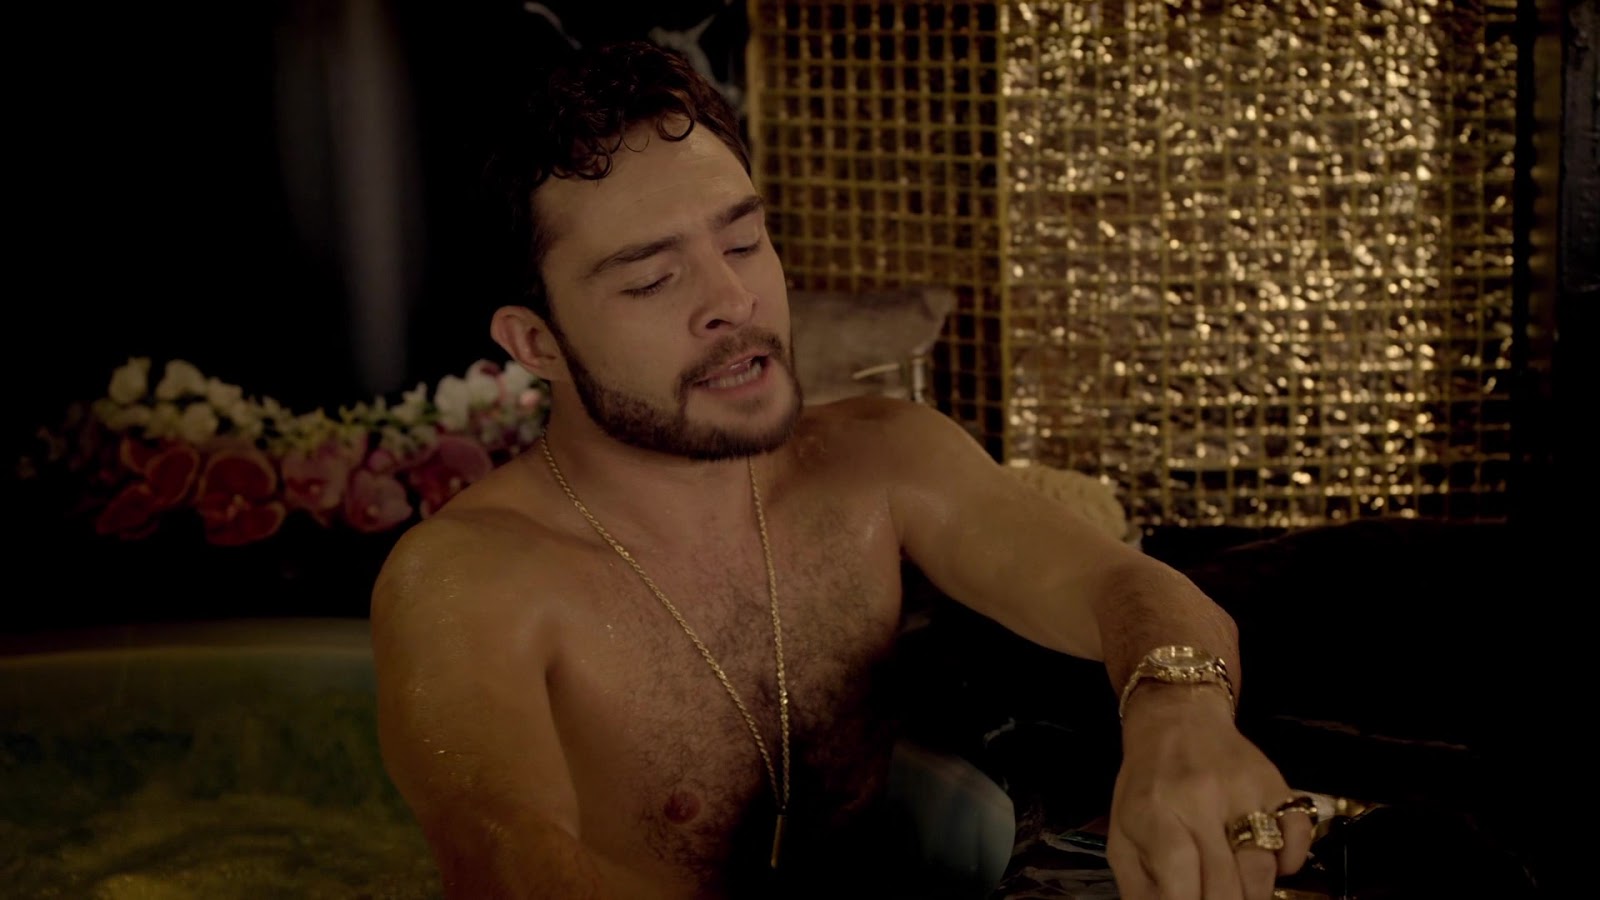 Ed Westwick shirtless in Snatch 1-03 "Going In Heavy" .